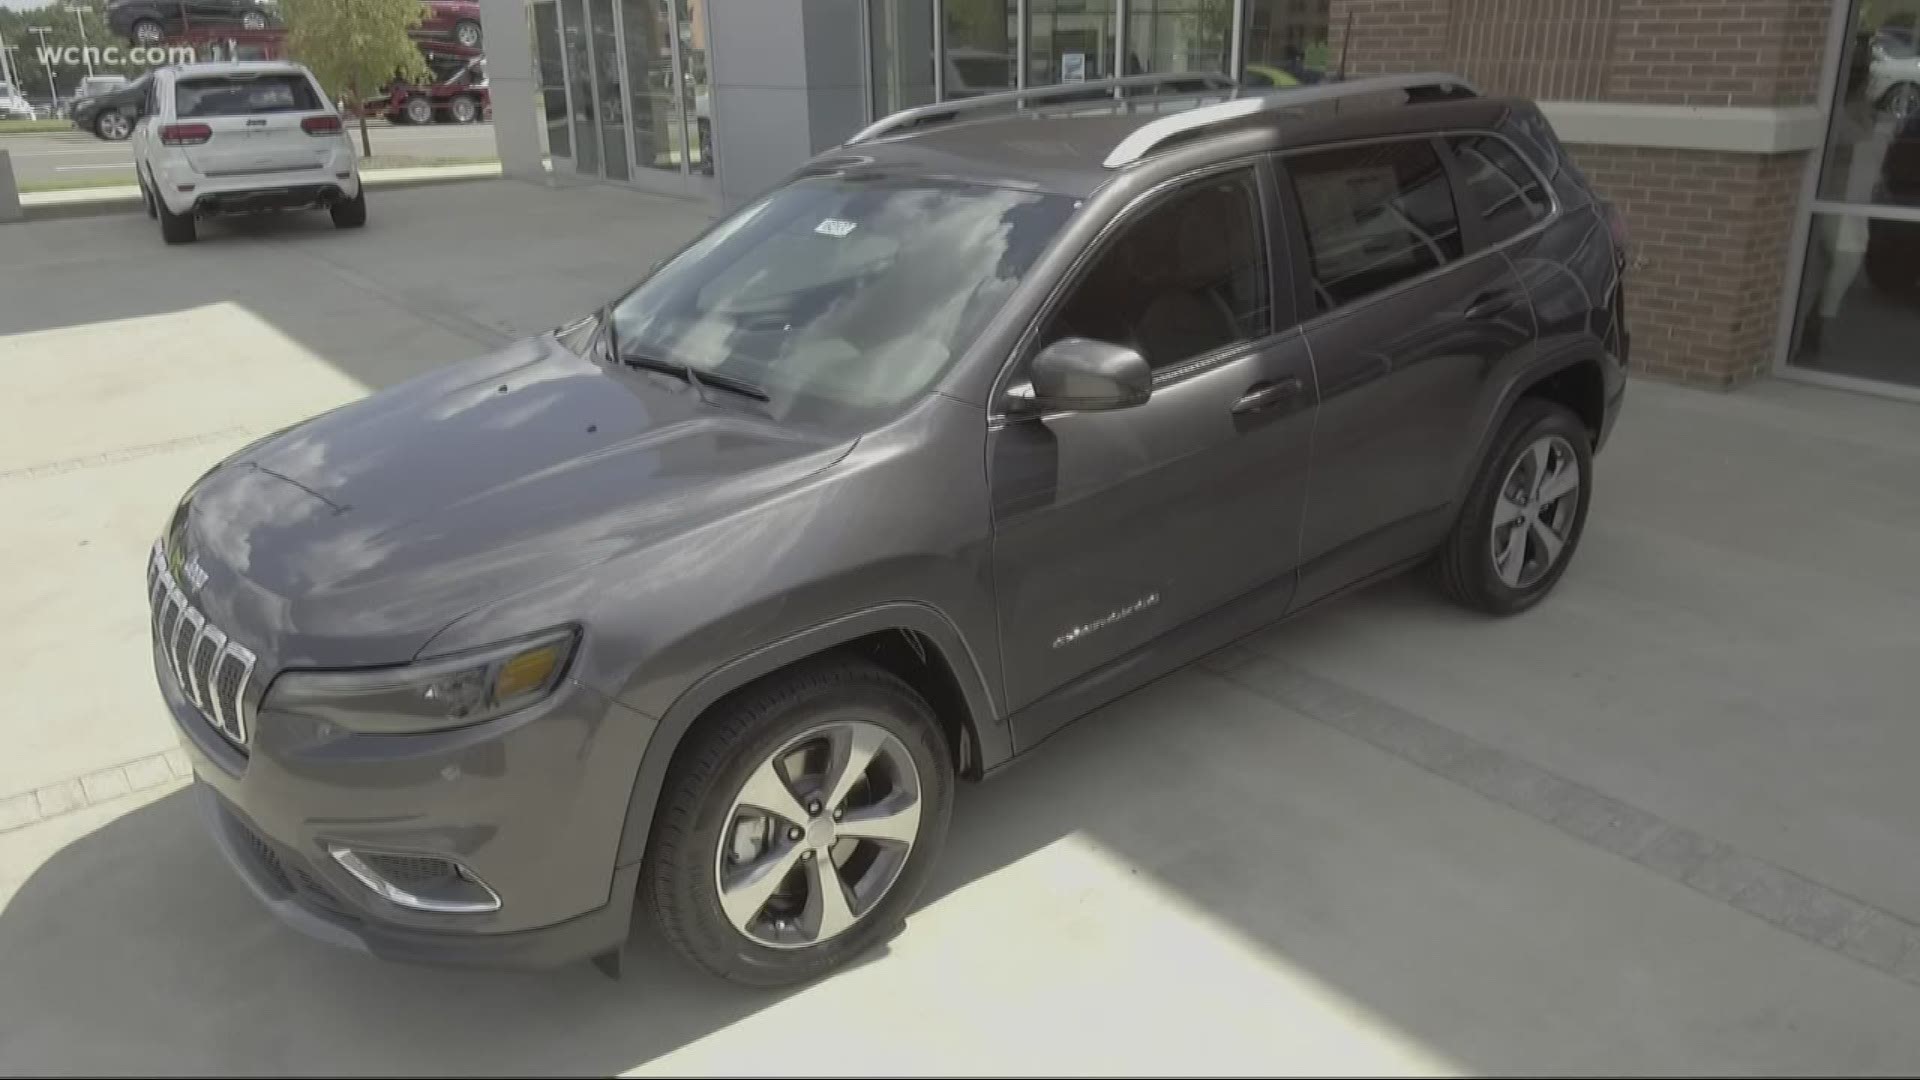 Kelly Alston with Mills Automotive Group shows us why the Jeep Grand Cherokee is the perfect family car.